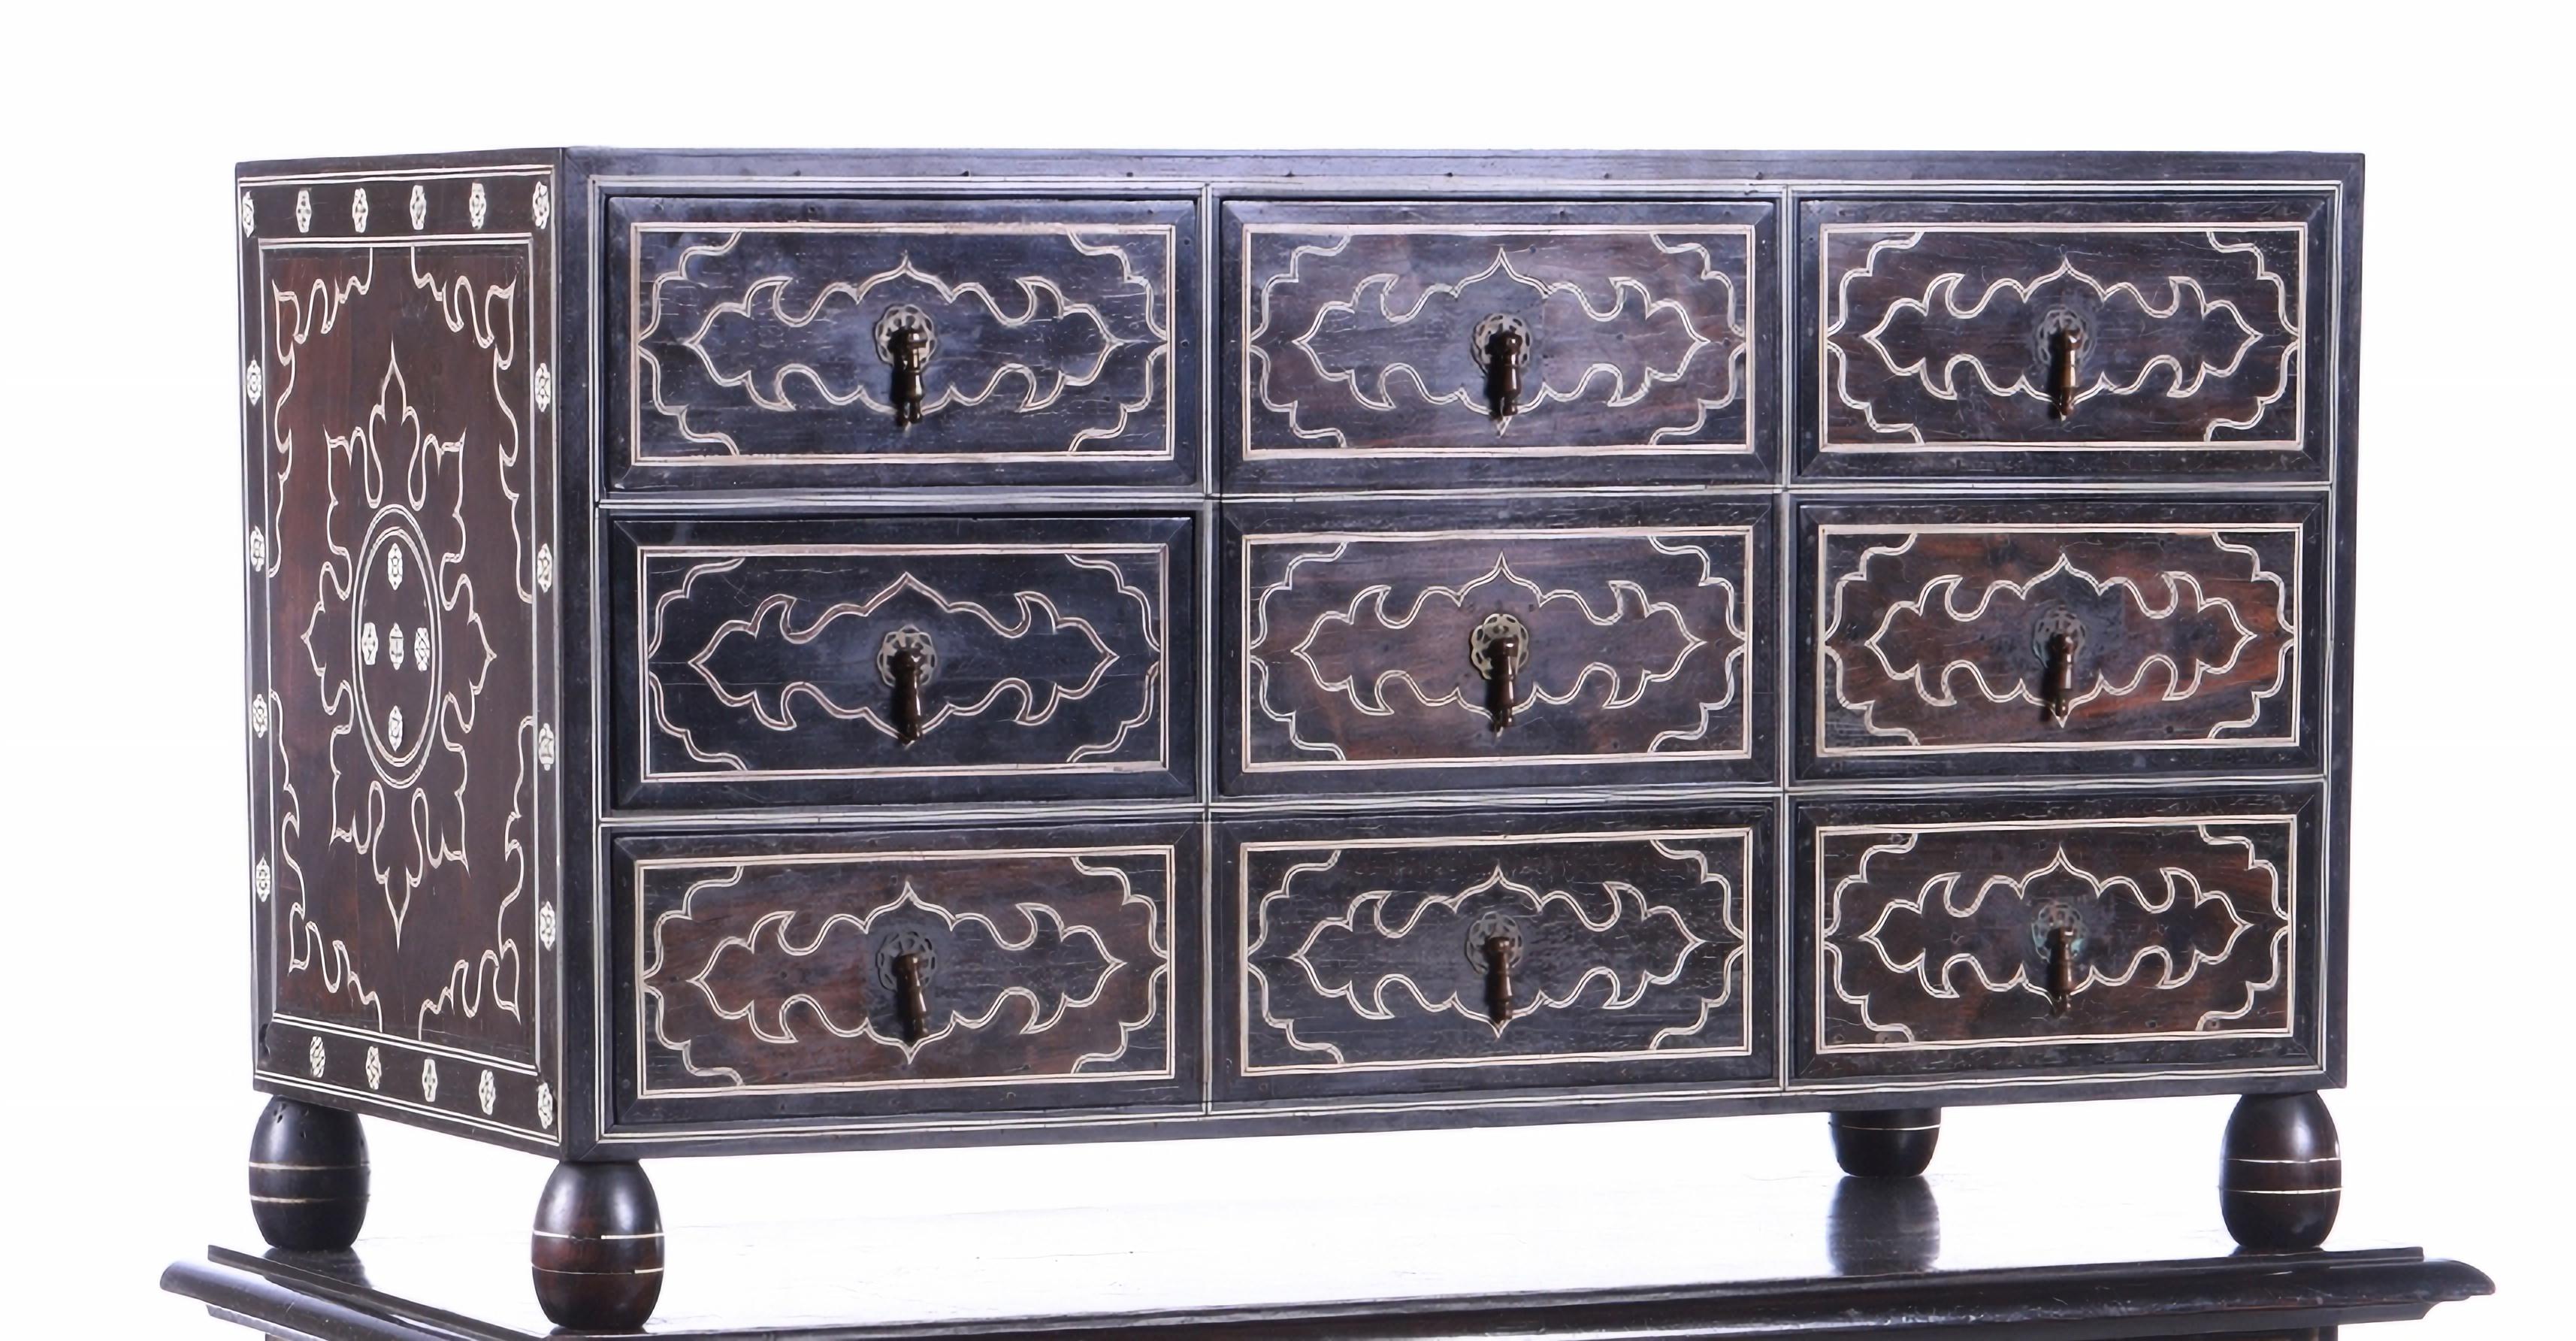 Cabinet counter
Indo-Portuguese - Mogol
17th century,
in teak, ebony and ivory, with eight drawers simulating nine. Decoration representing stylized geometric and floral elements. Brass fittings.
Stands on a back trivet, in wood and